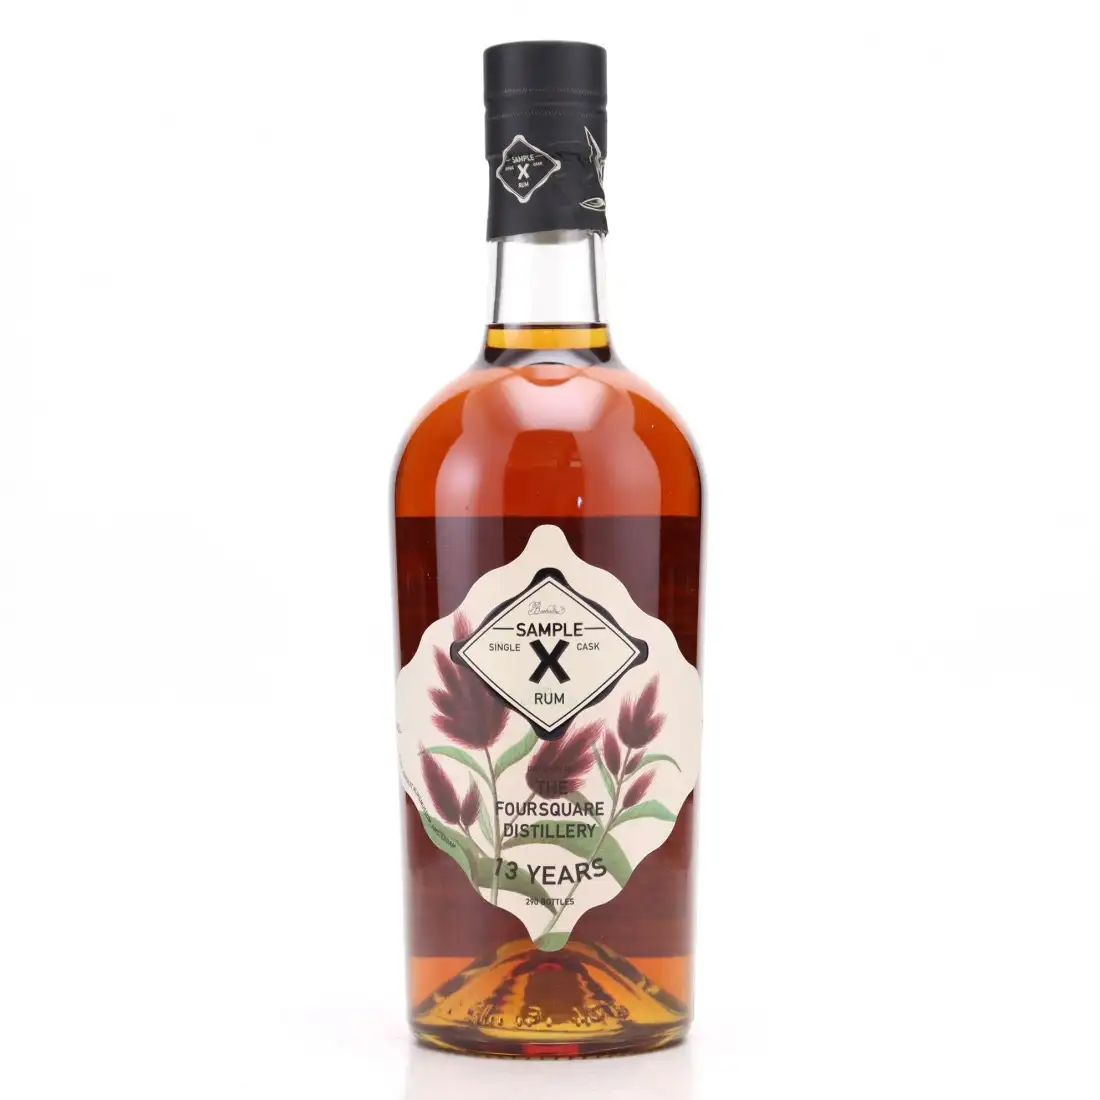 Image of the front of the bottle of the rum Sample X Foursquare Distillery